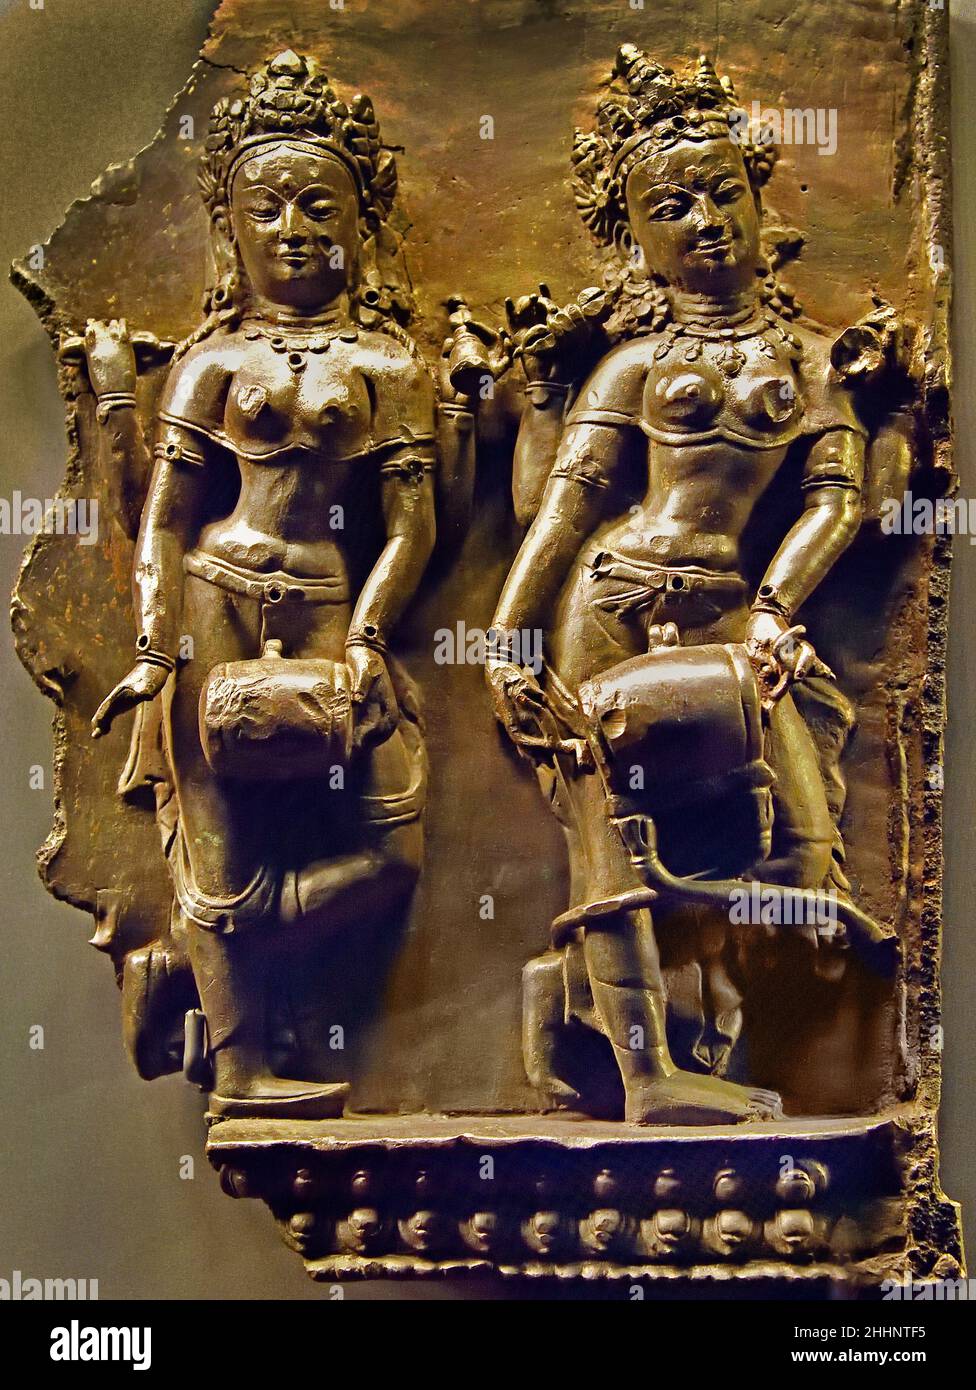 Two Ḍākinī making music and dancing 15th century Tibet Tibetan art collection at the Museo d'arte orientale,Turin. Stock Photo